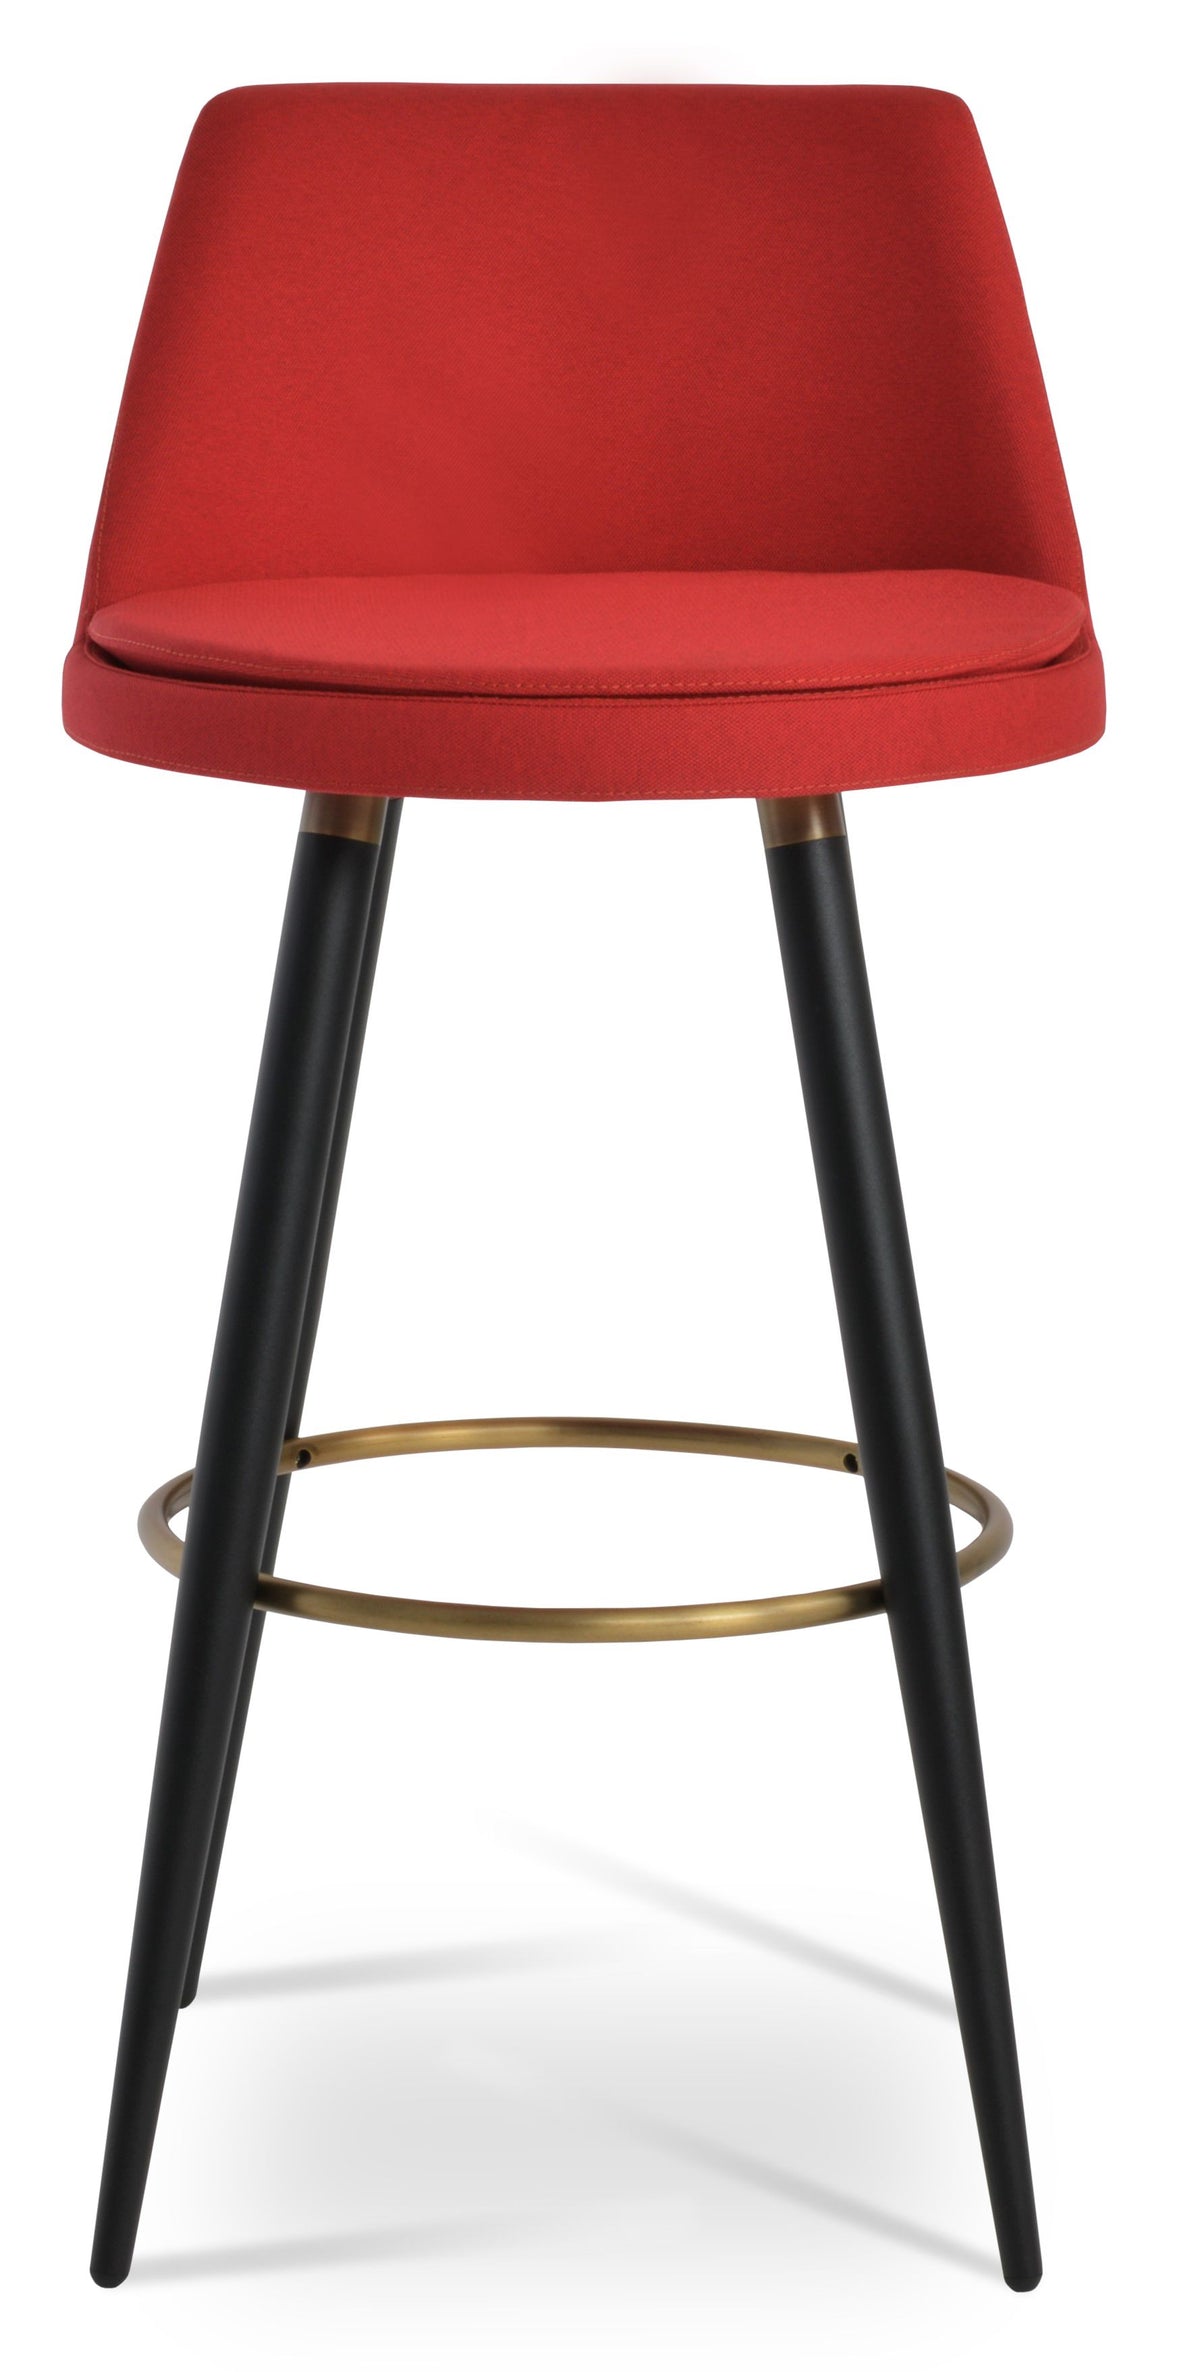 Martini DR Wood Stools by Soho Concept